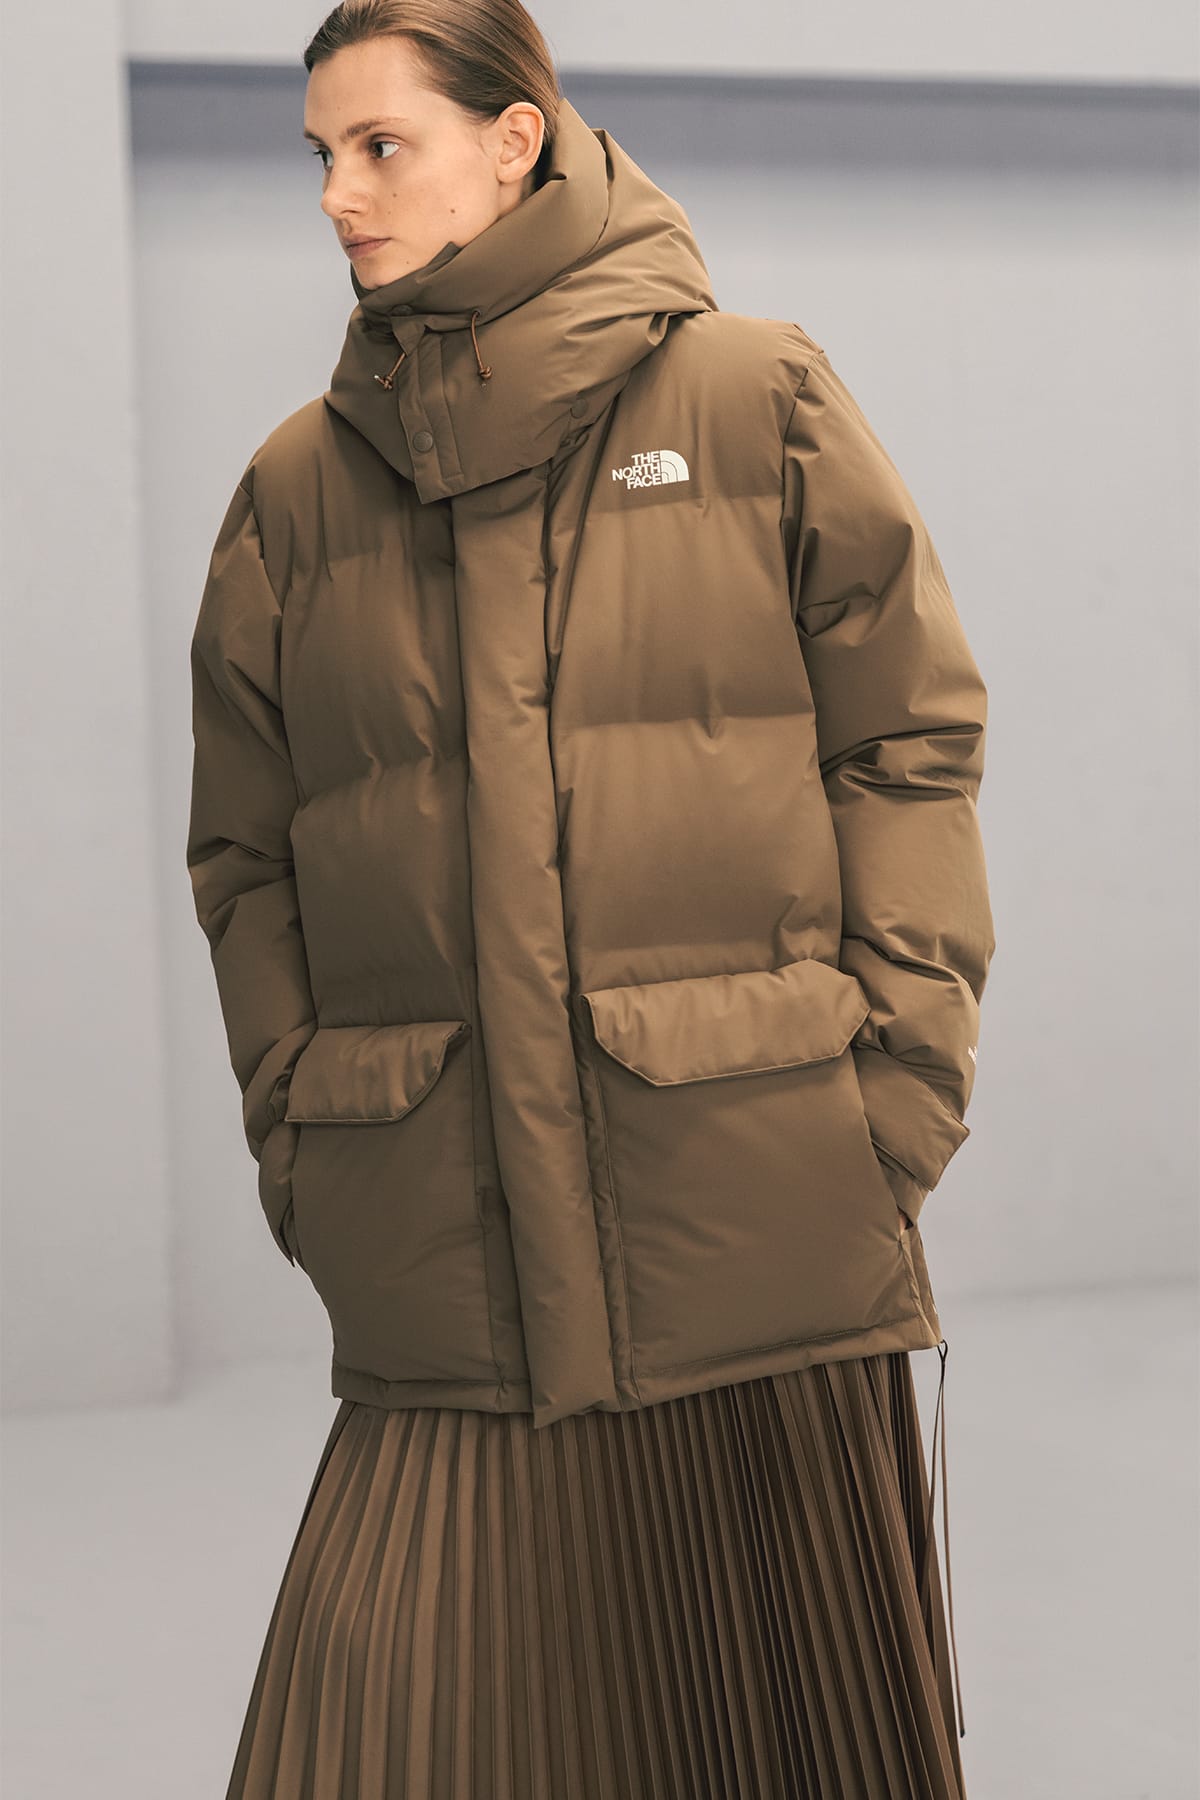 north face oversized puffer jacket